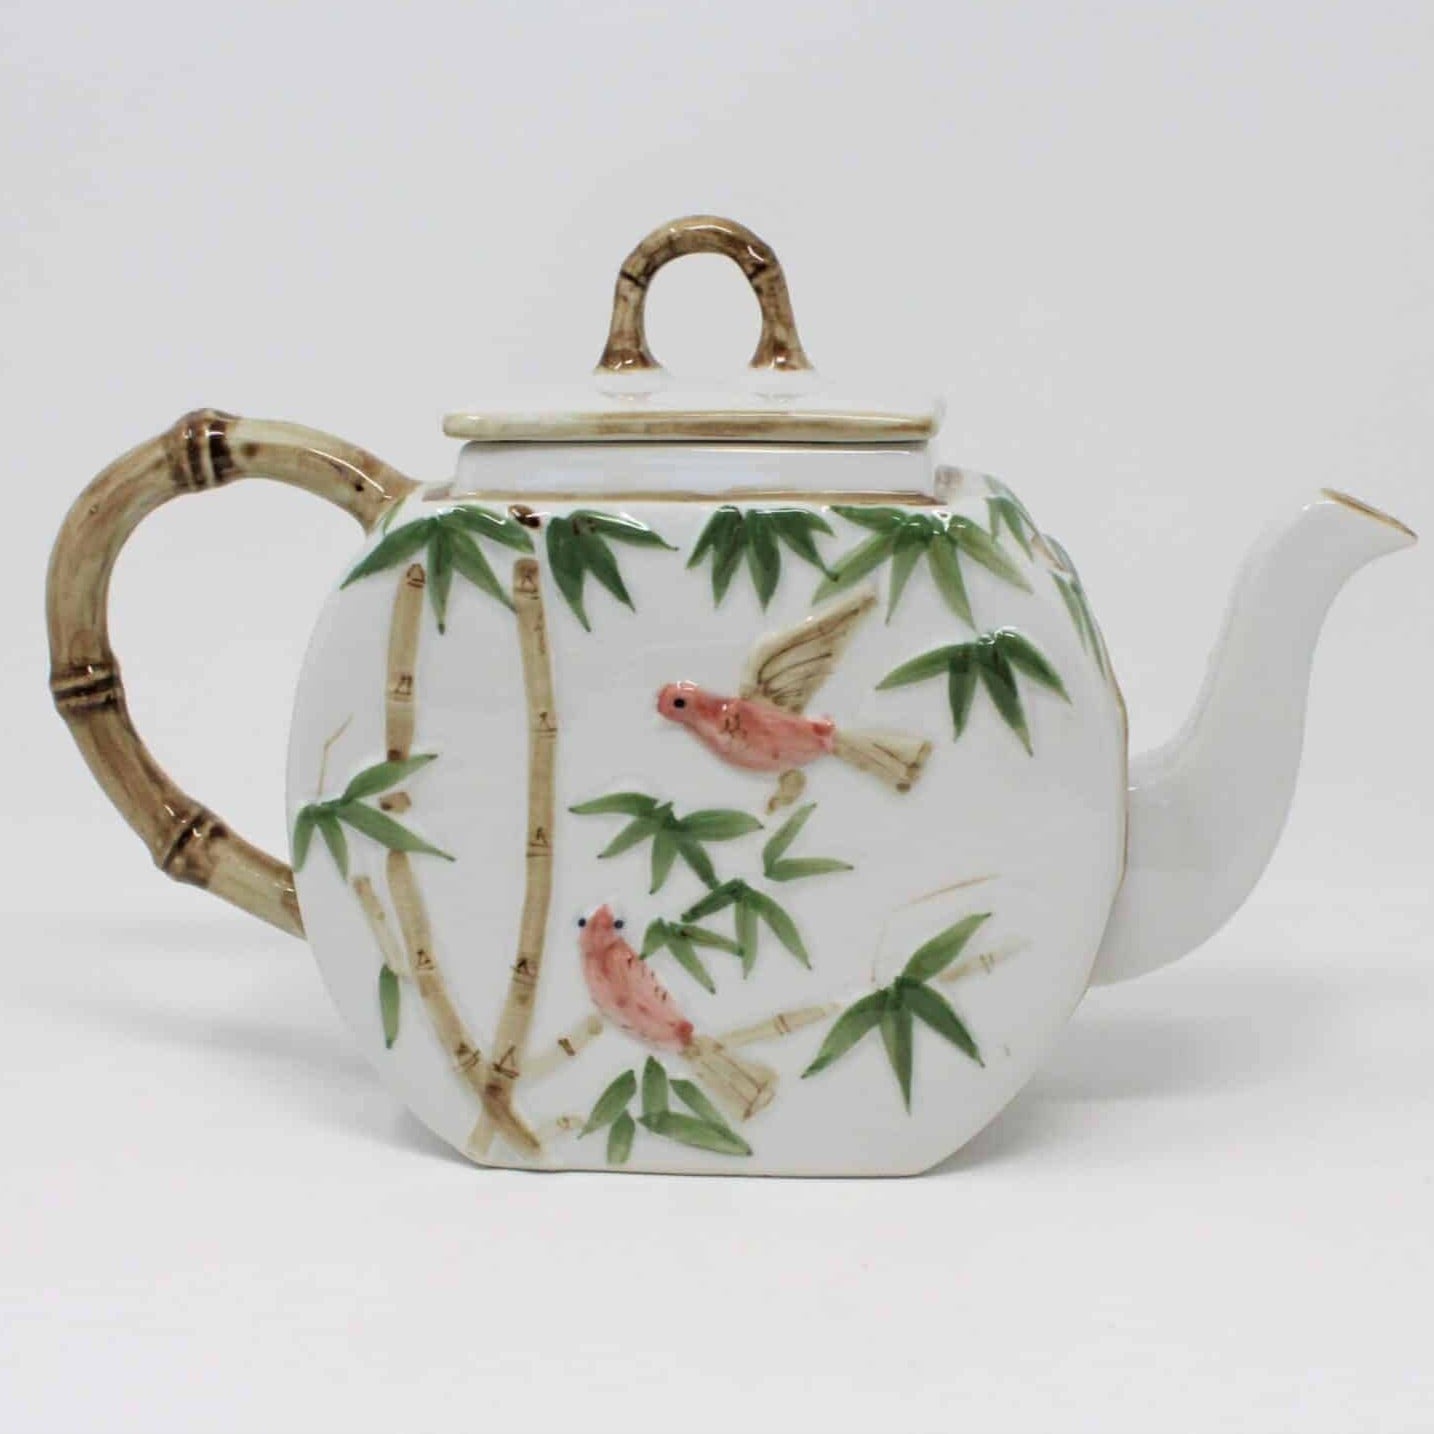 Teapot, Bamboo and Birds, Handcrafted, Ceramic, Thailand